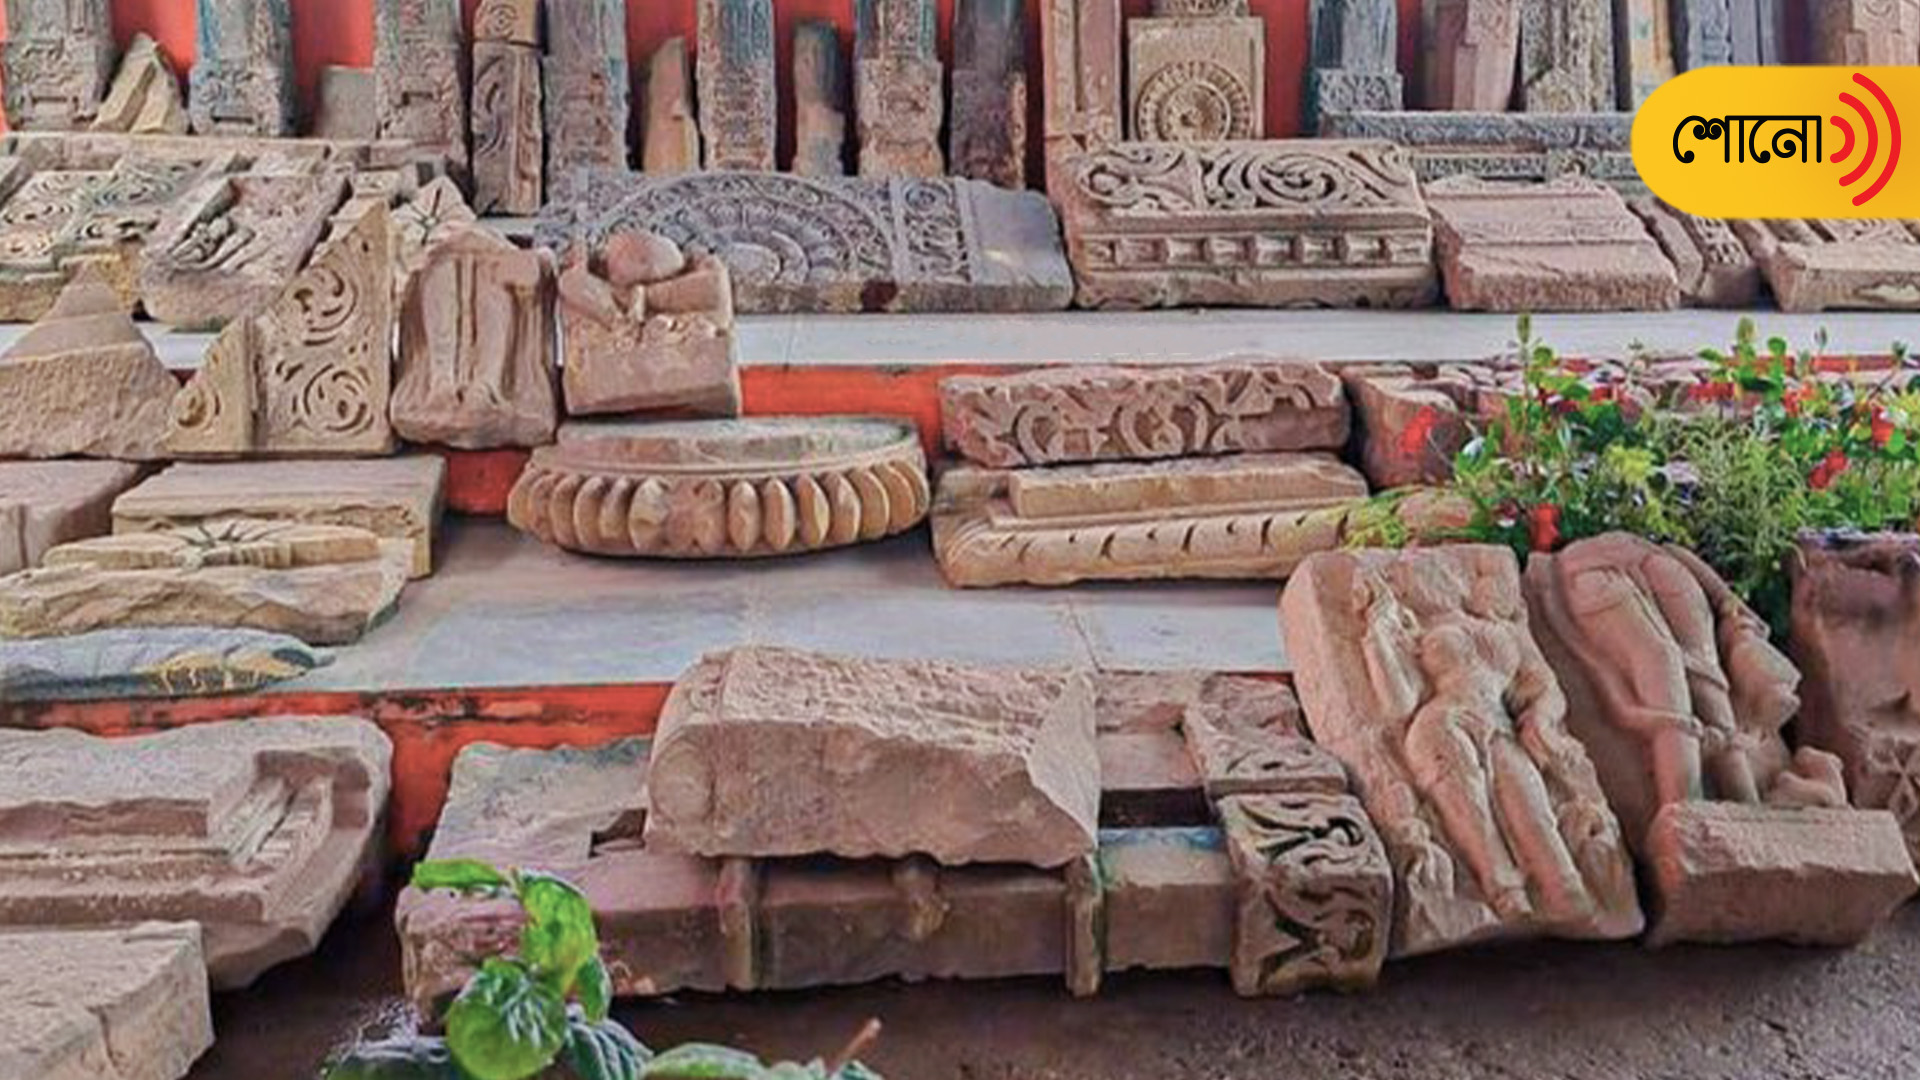 Remains of ancient temple discovered at Ram Janmabhoomi site in Ayodhya